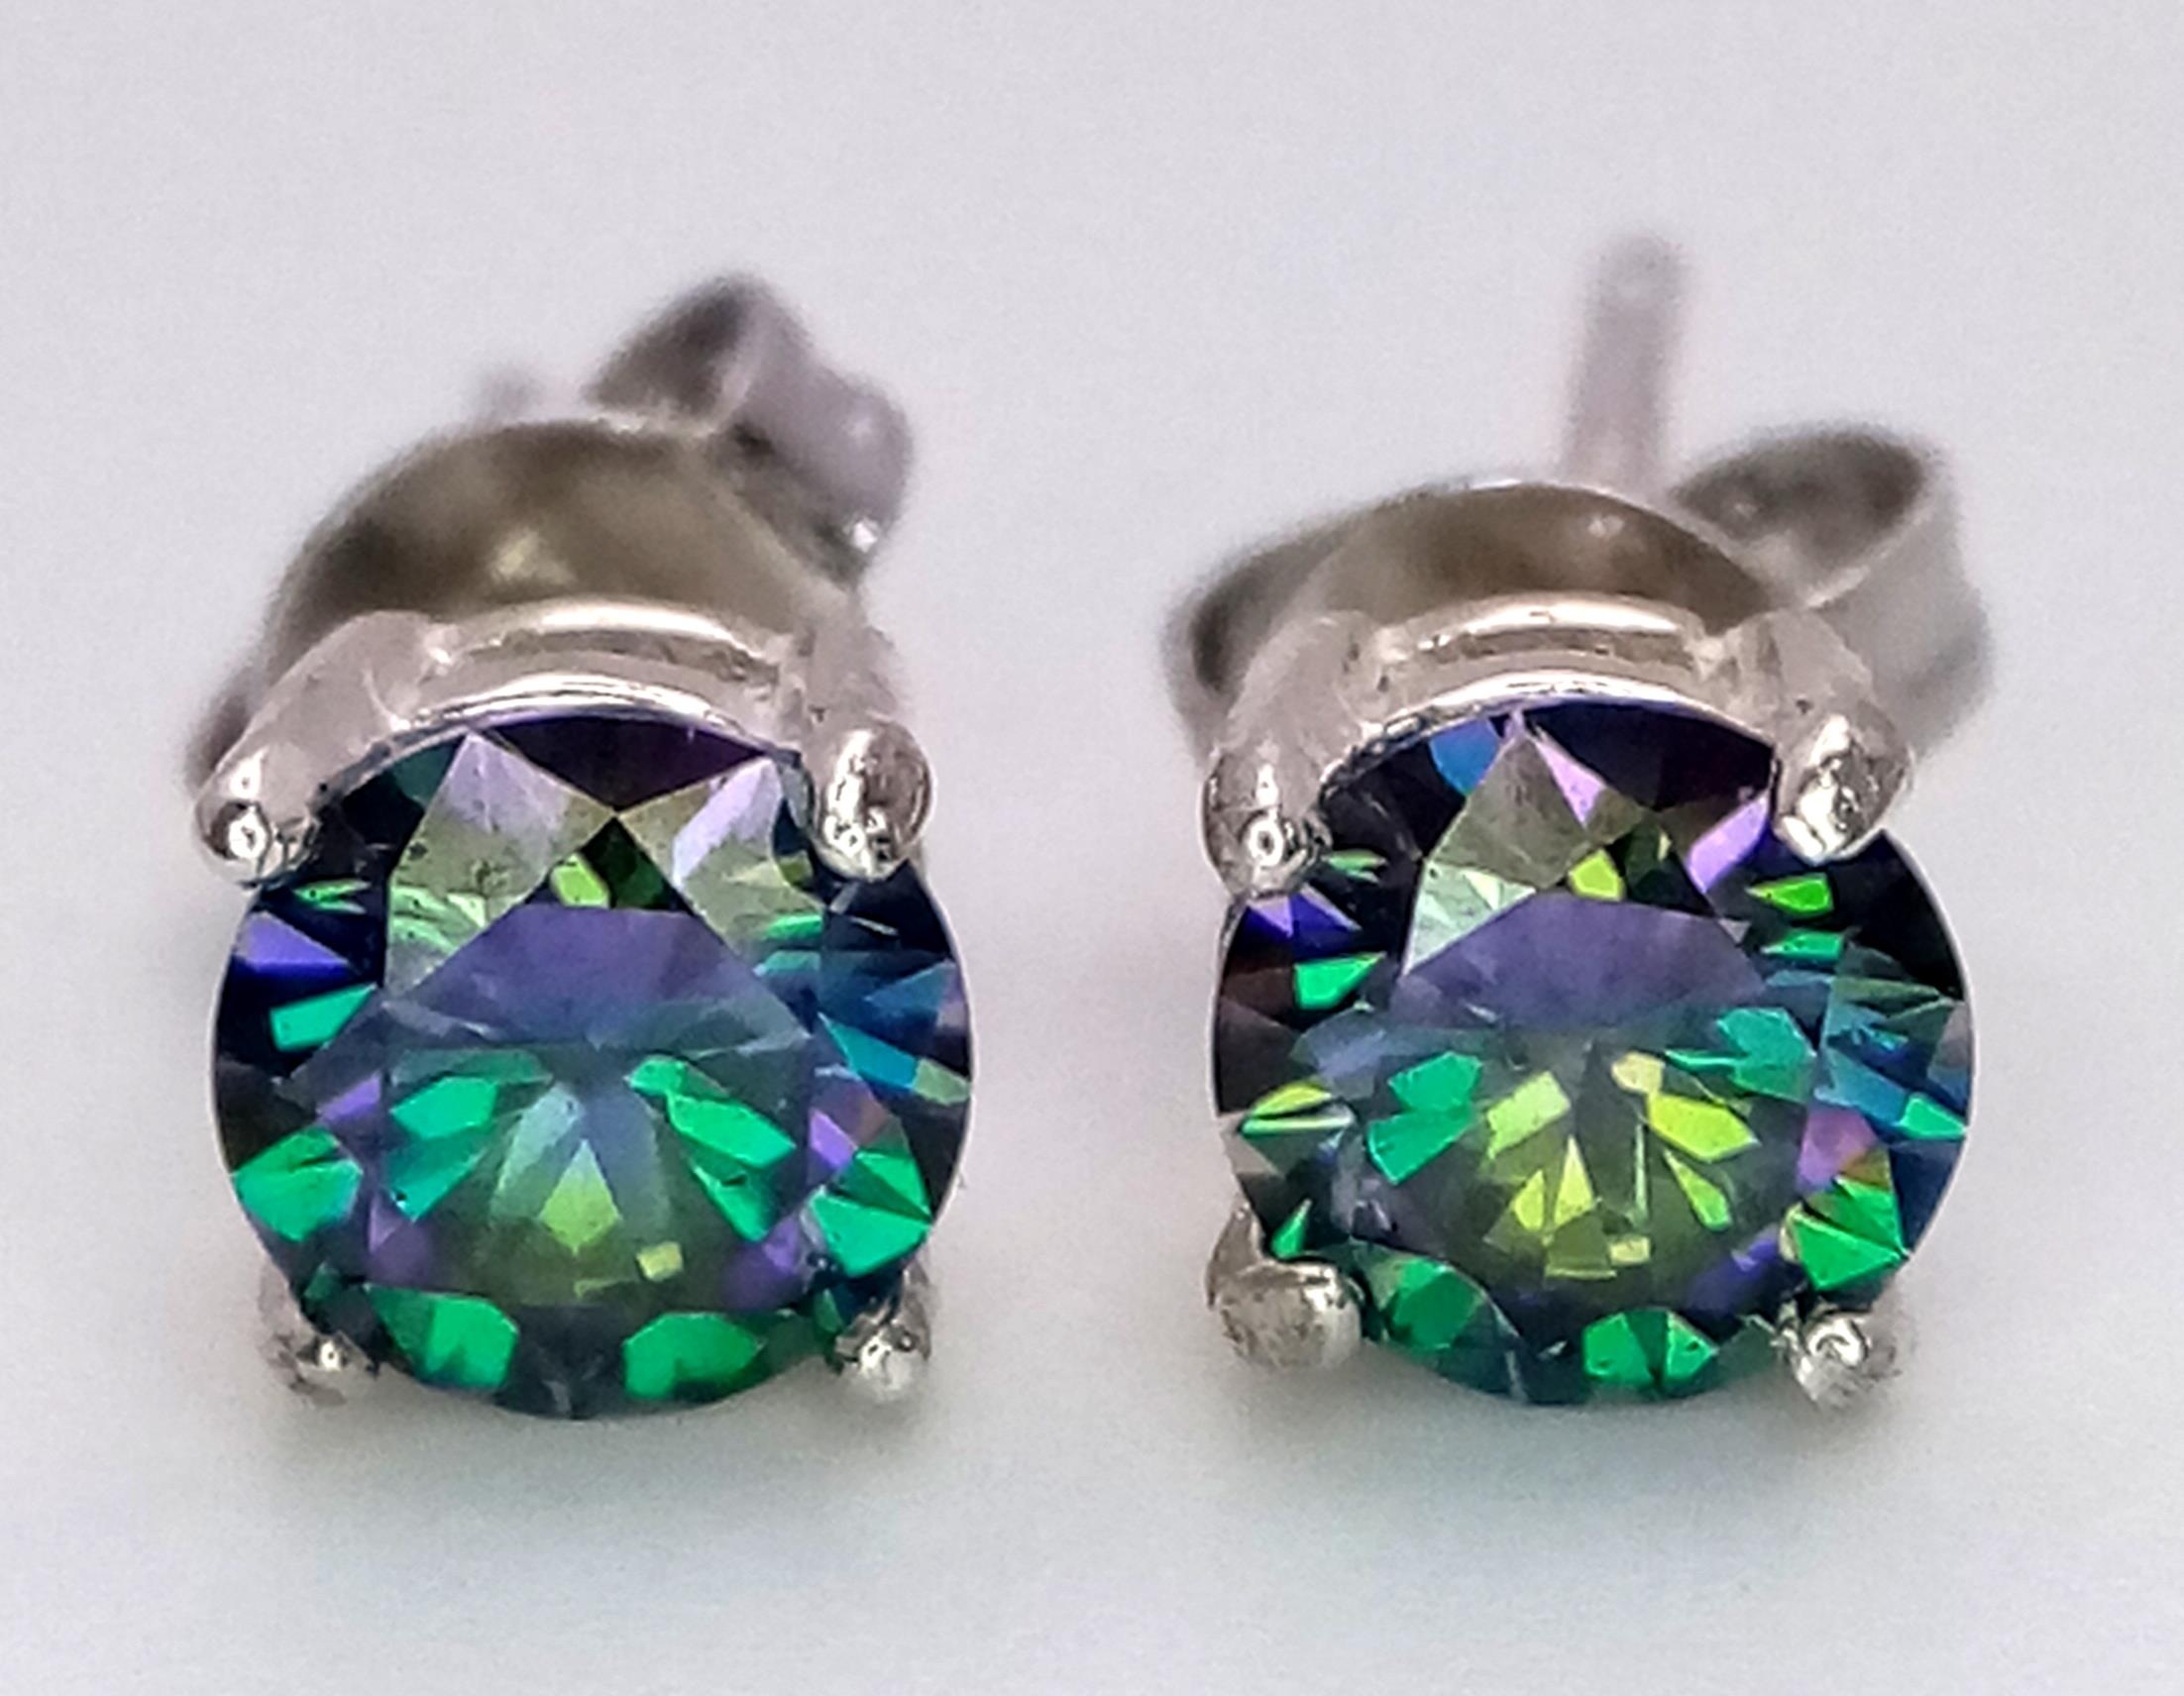 A Pair of 0.5ct Rainbow Moissanite Stud Earrings. Set in 925 silver. Both come with GRA